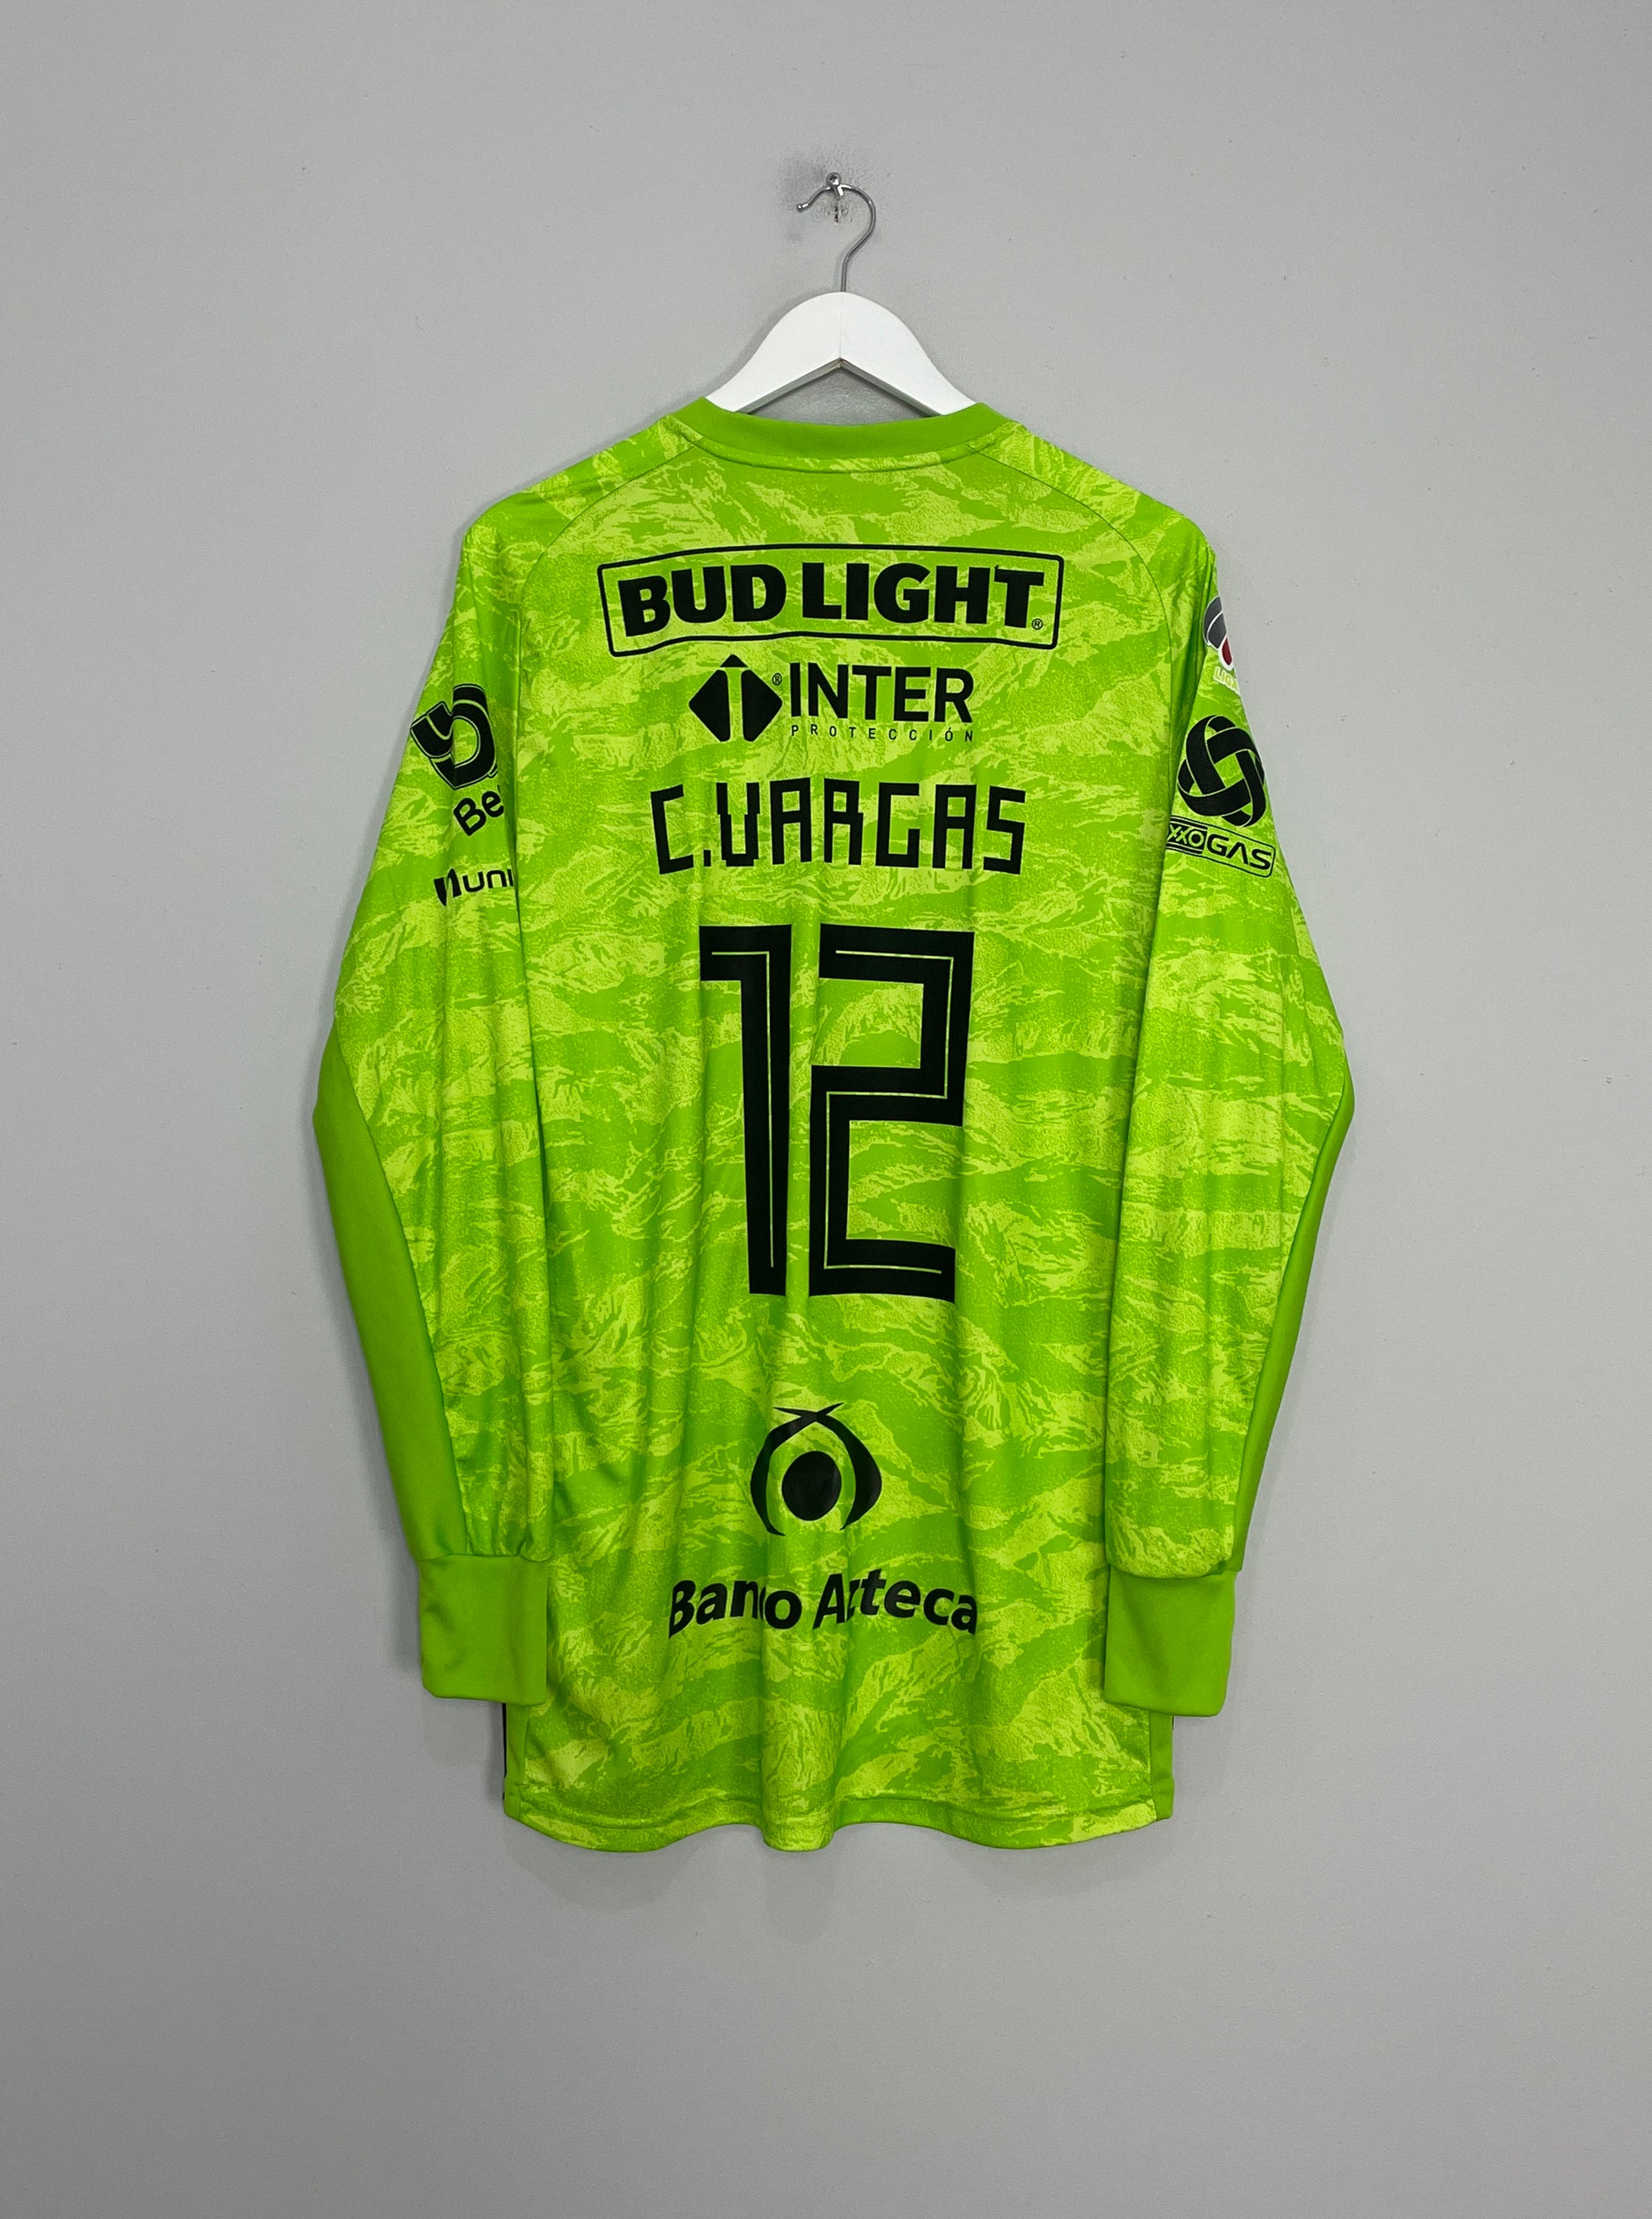 Image of the Atlas Vargas shirt from the 2019/20 season